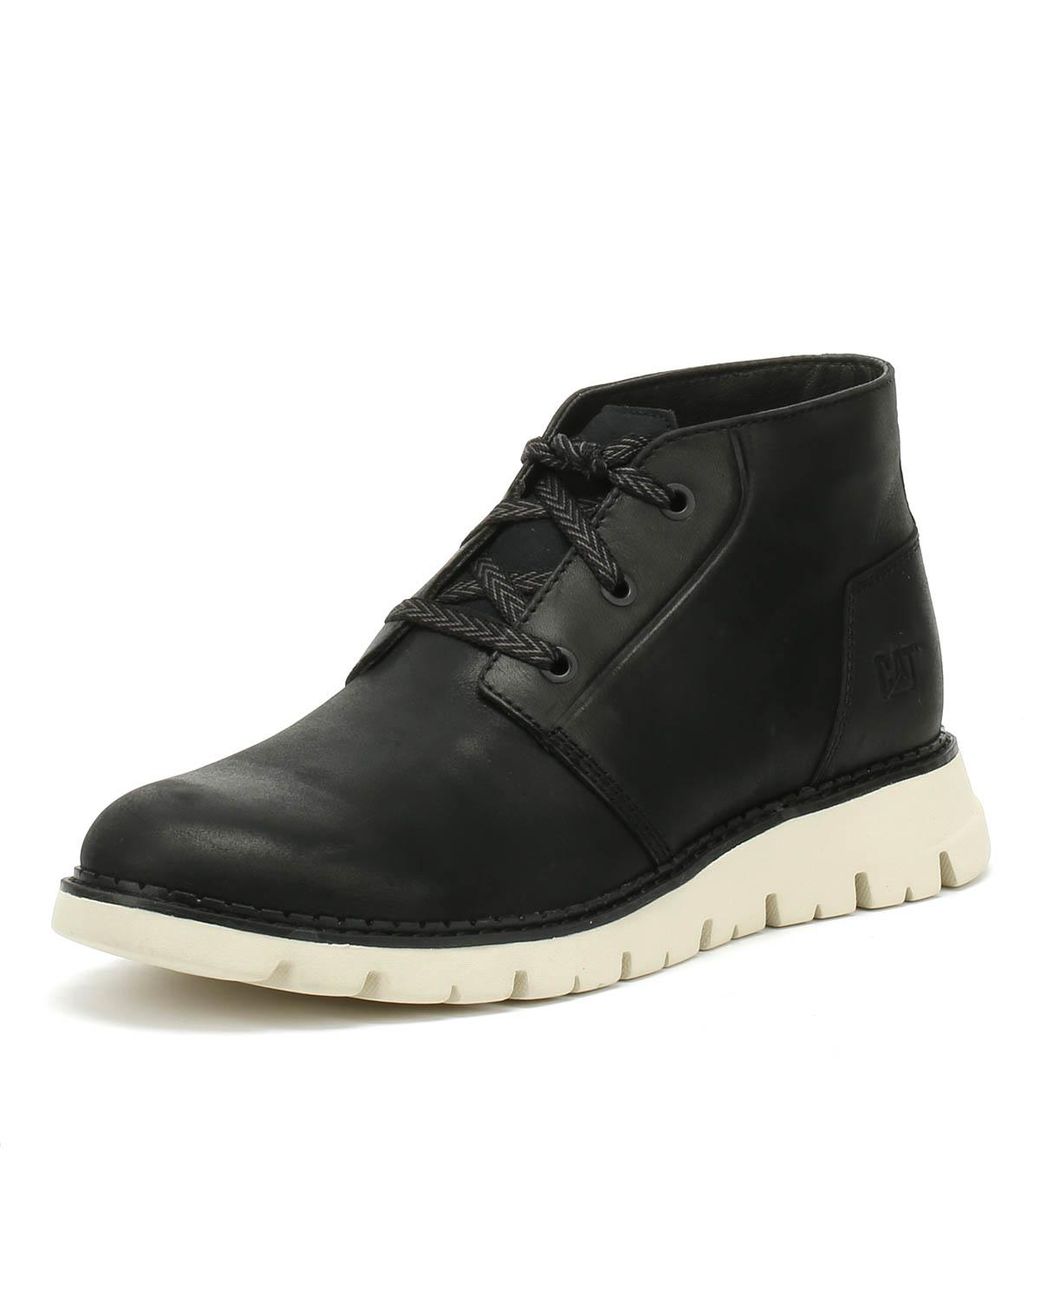 Black All Sizes Caterpillar Sidcup Mens Boots 